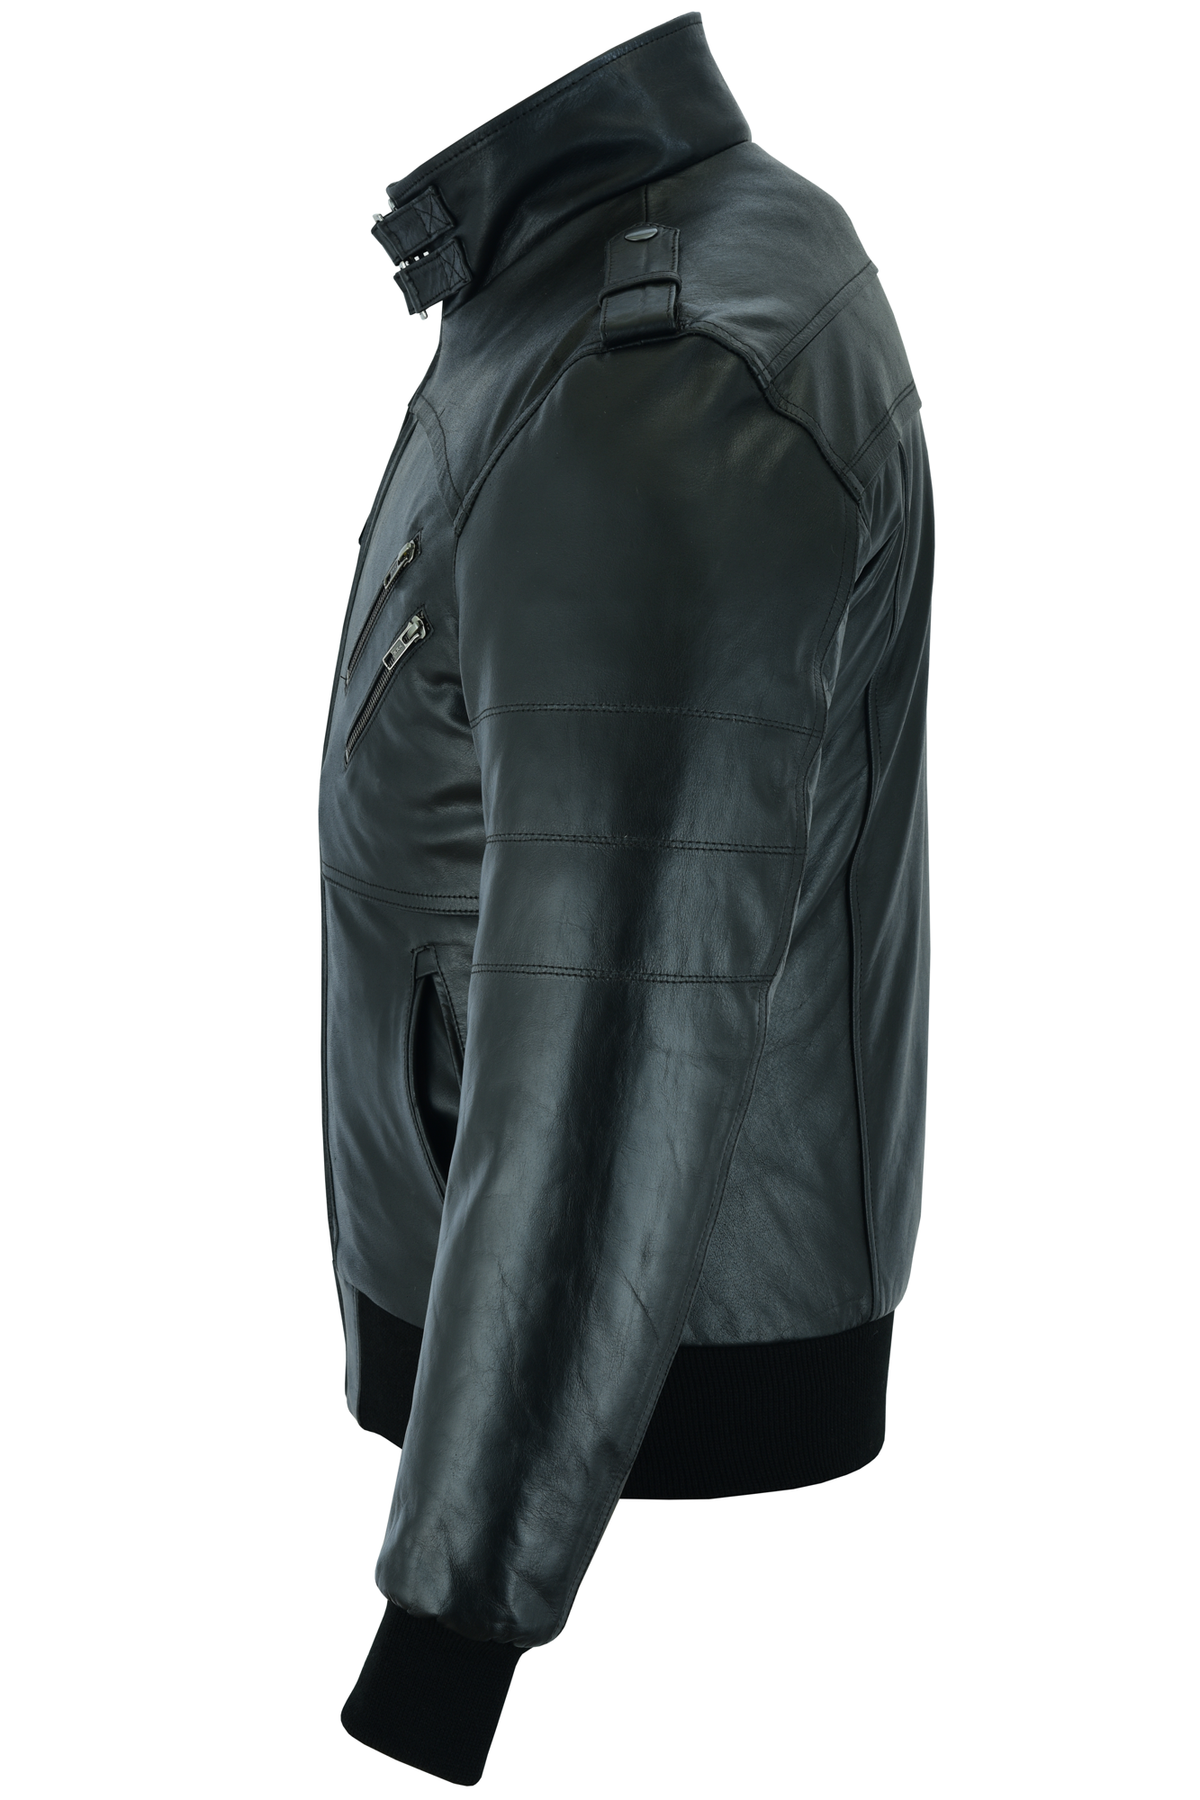 Men's Sven Bomber Black Waxed Premium Cowhide Motorcycle Leather Jacket with Removeable Hood